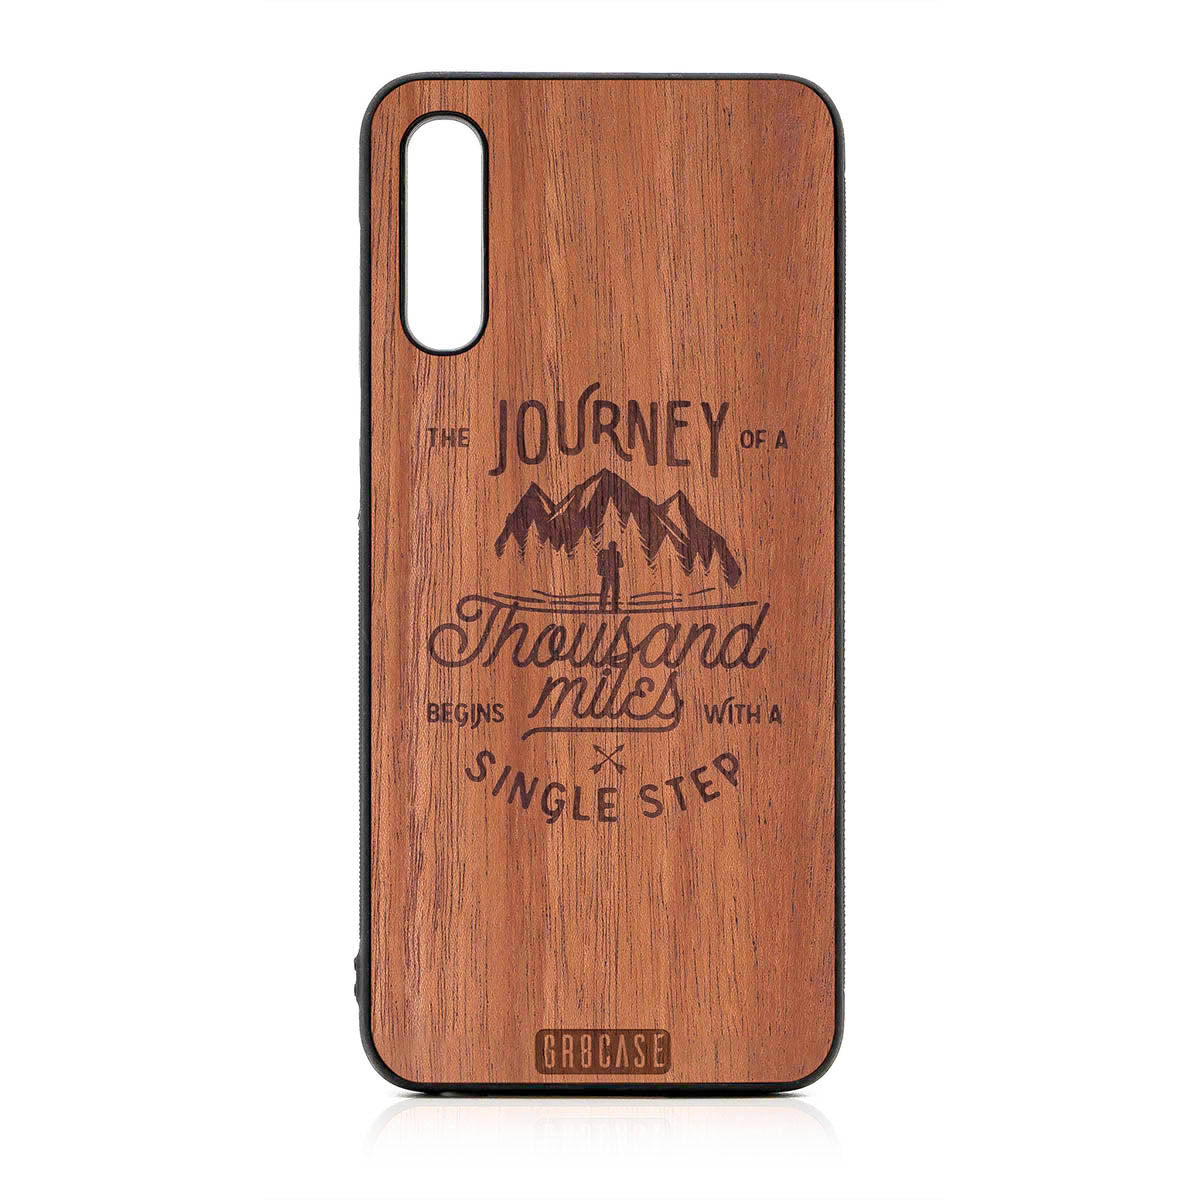 The Journey Of A Thousand Miles Begins With A Single Step Design Wood Case For Samsung Galaxy A50